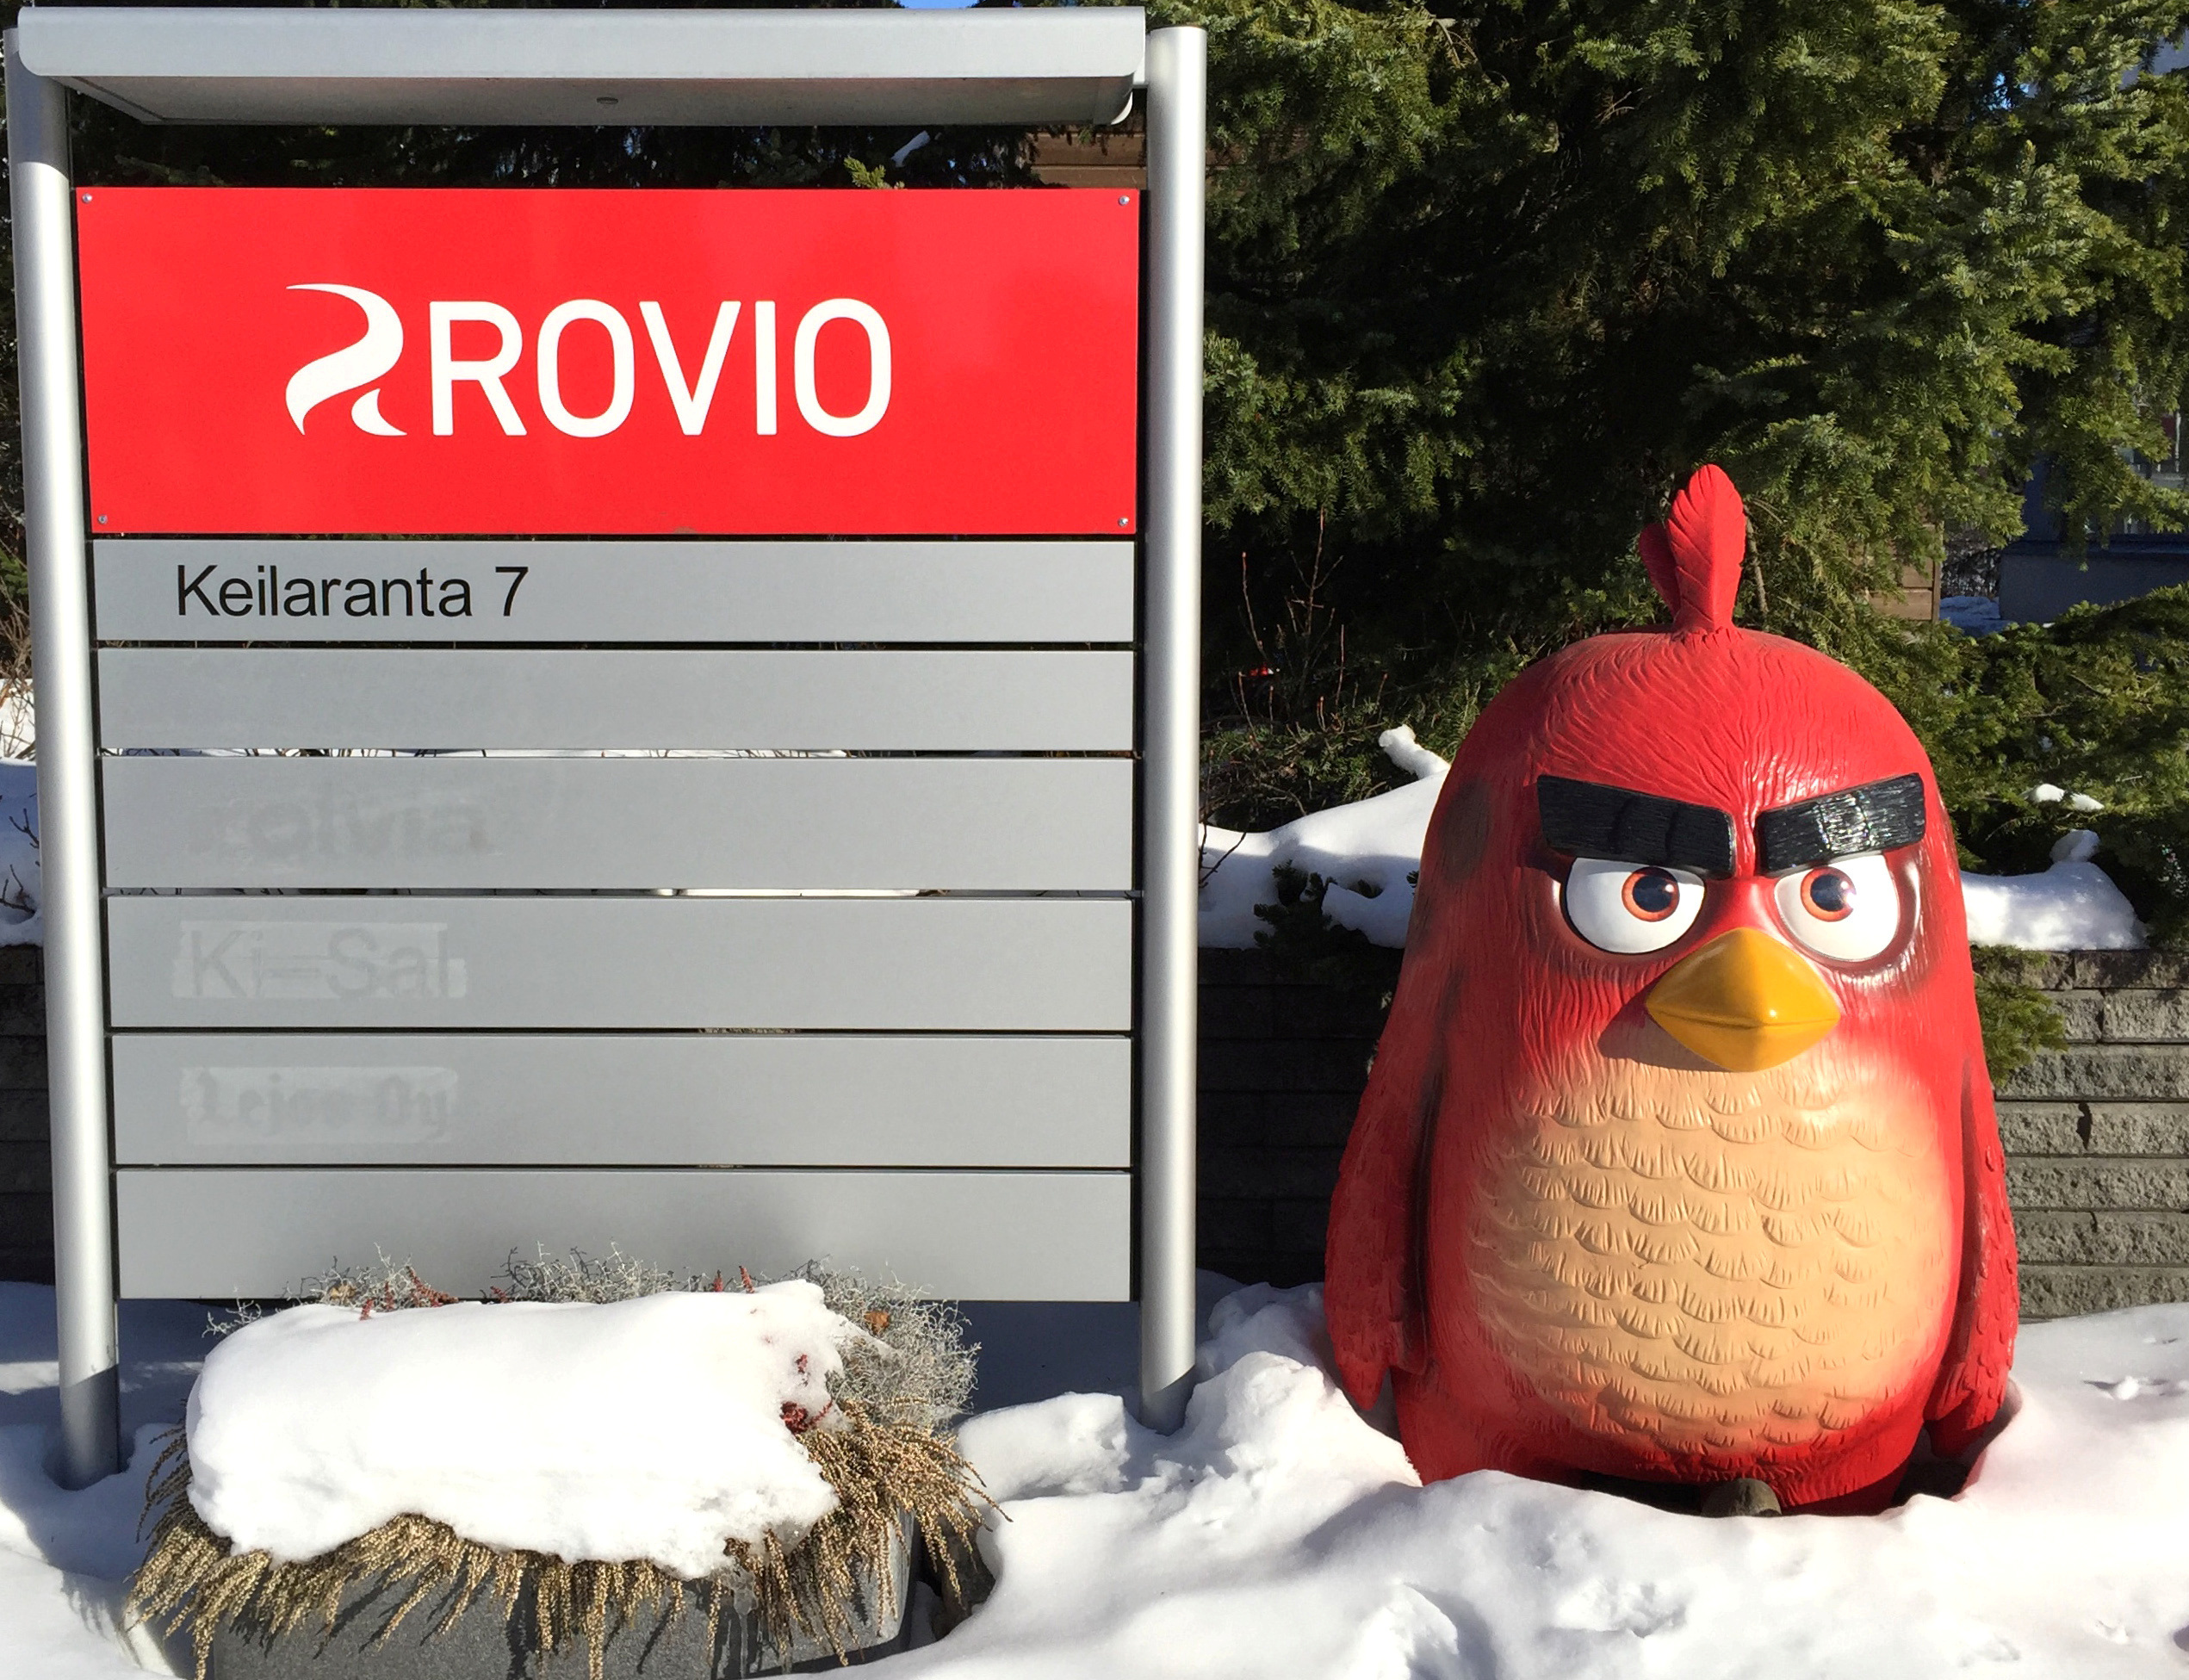 A Rovio sign and a figure of an Angry Birds character are seen in front of Rovio's headquarters in Espoo